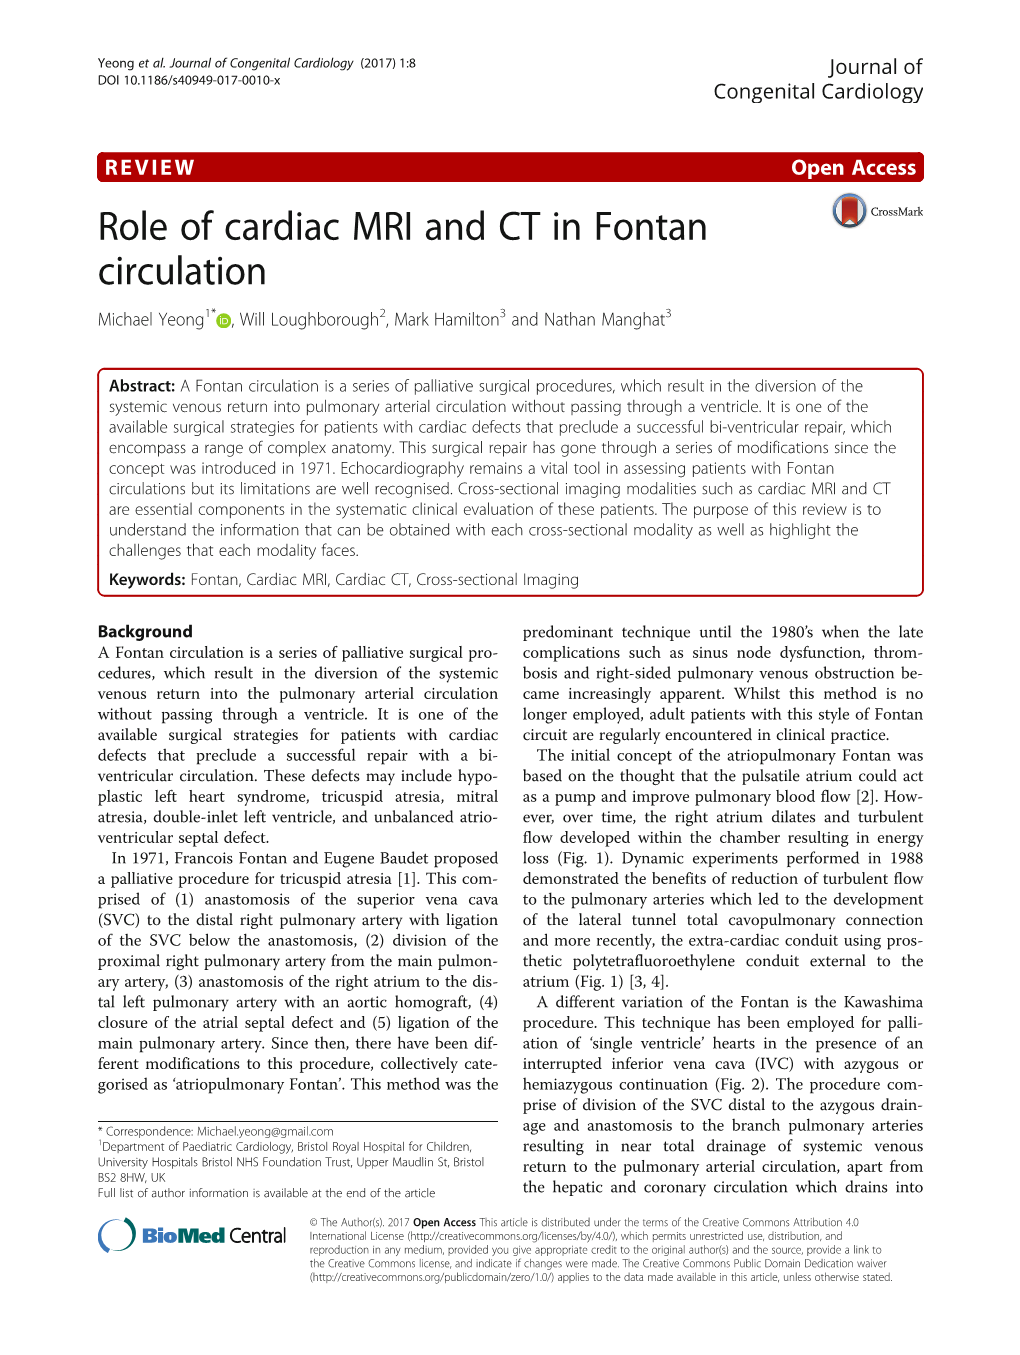 Role of Cardiac MRI and CT in Fontan Circulation Michael Yeong1* , Will Loughborough2, Mark Hamilton3 and Nathan Manghat3